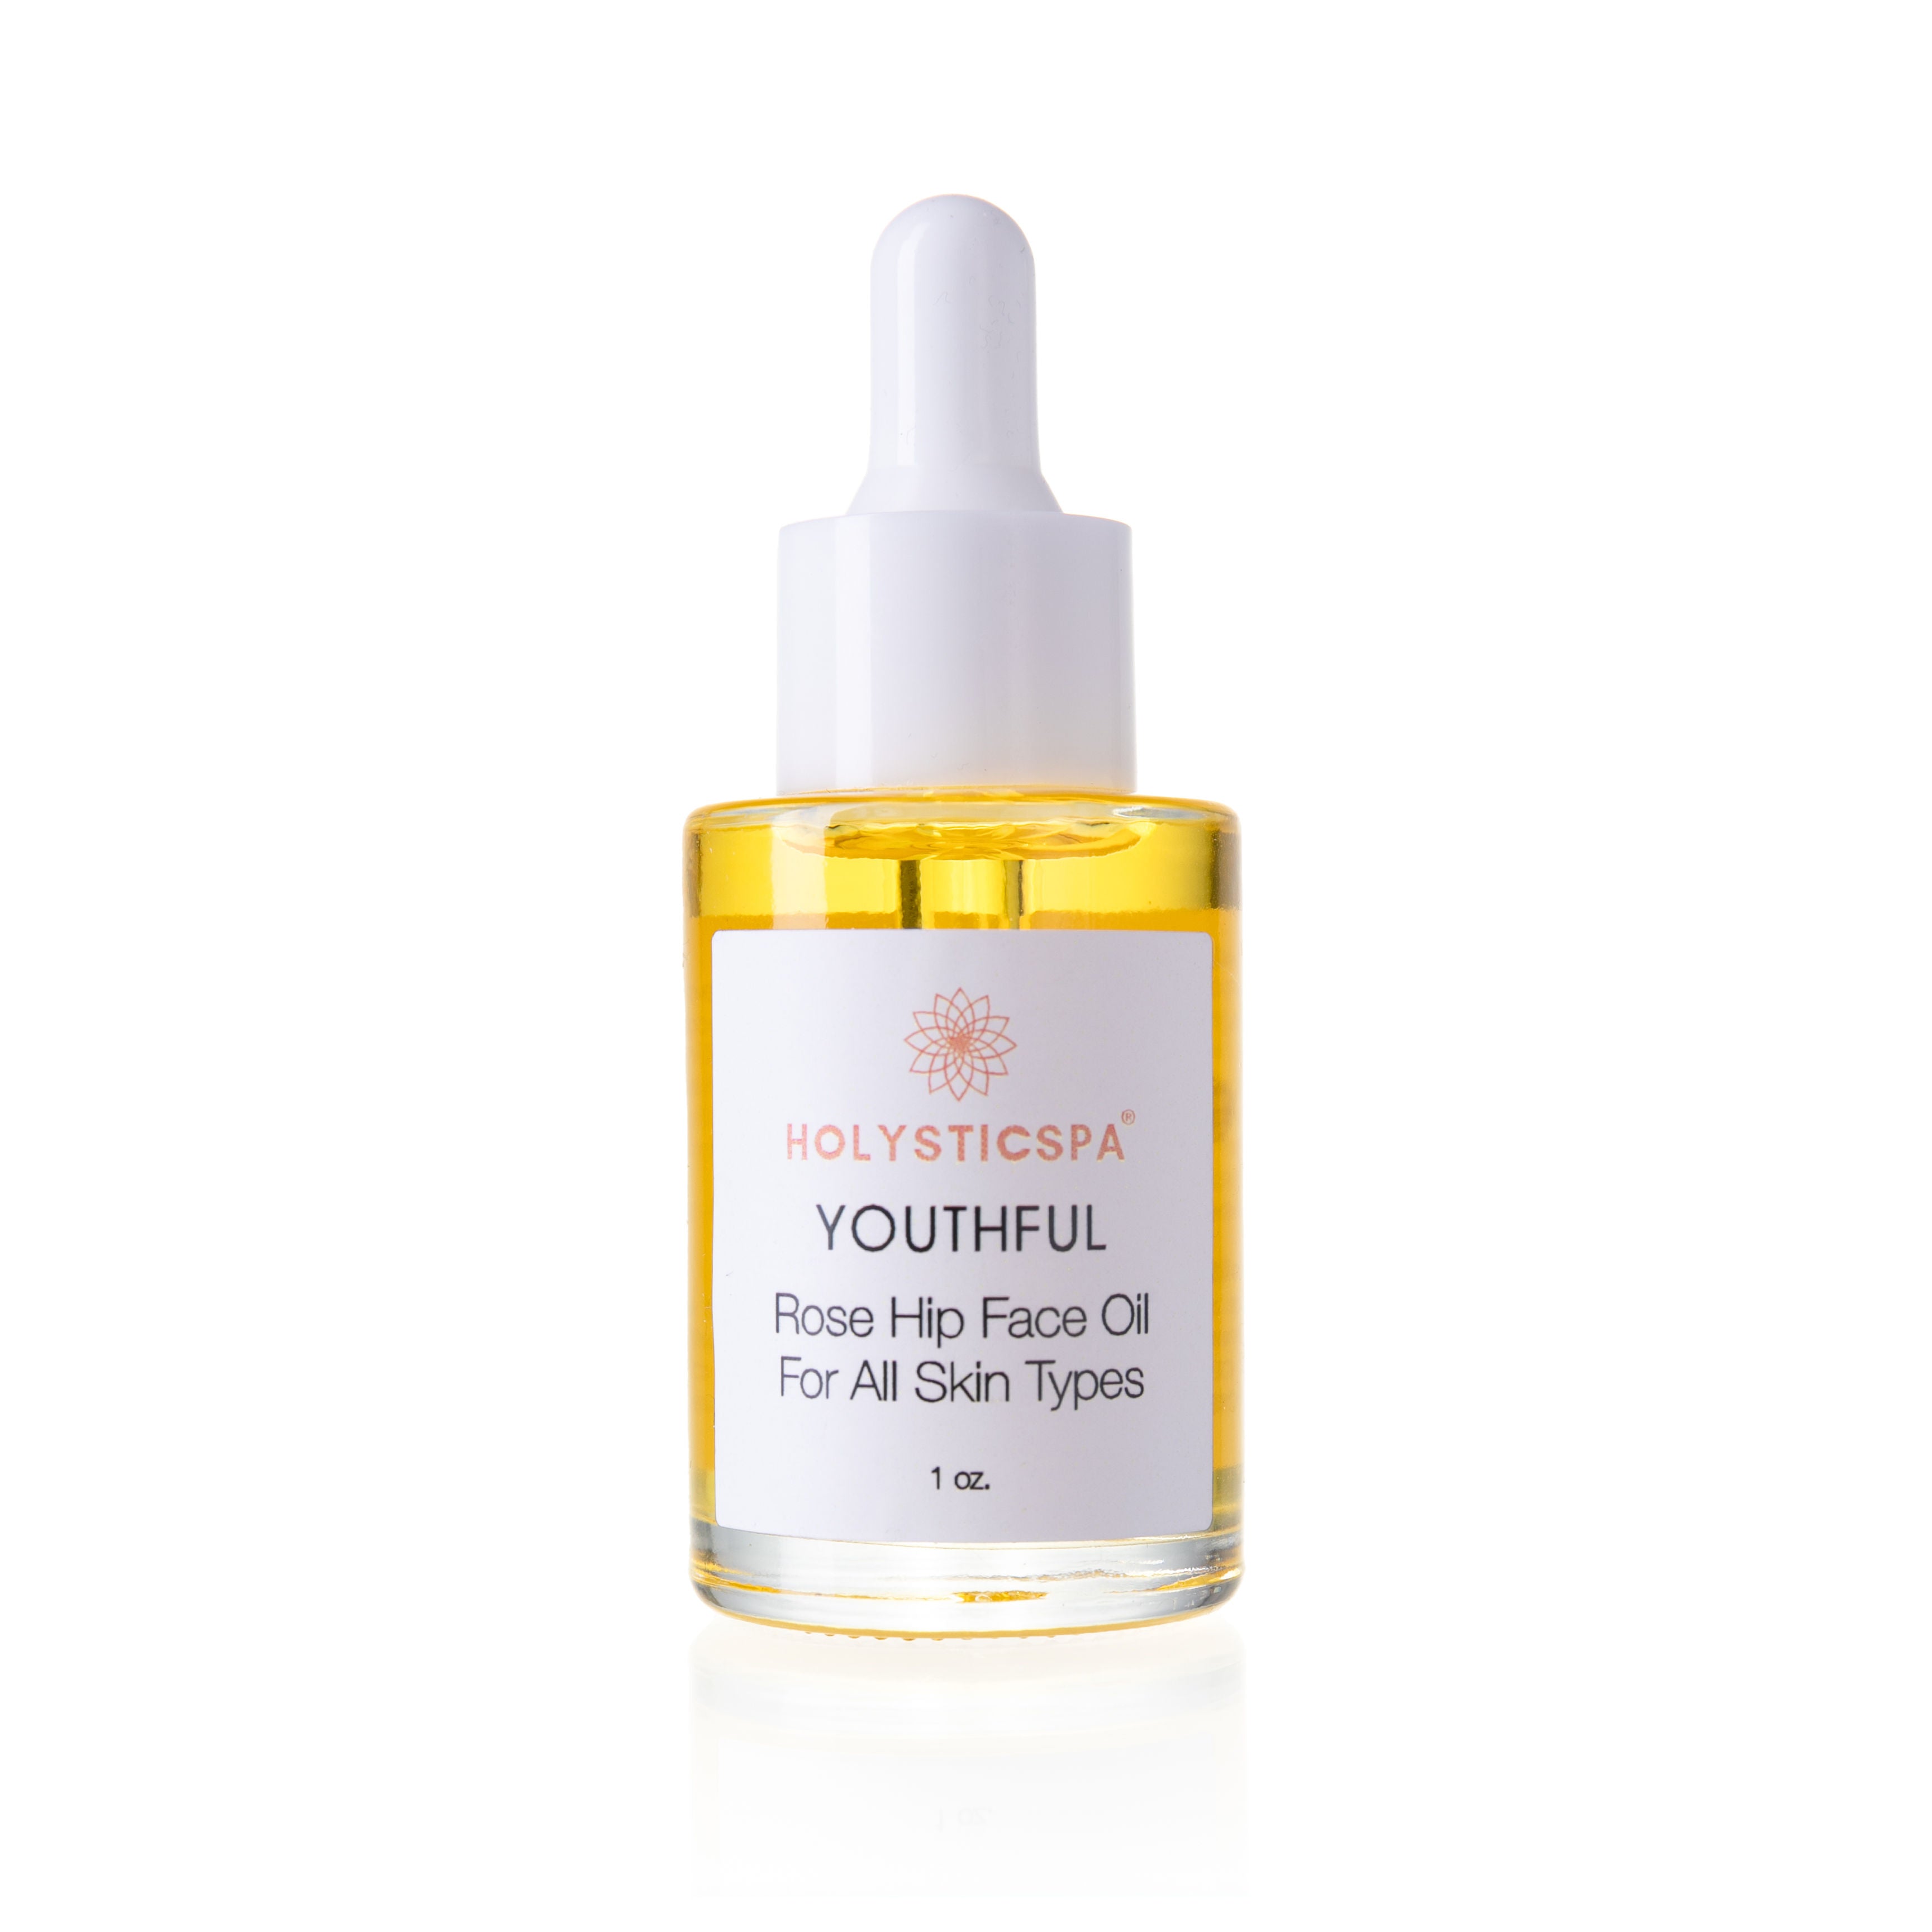 Youthful Rosehip Face Oil